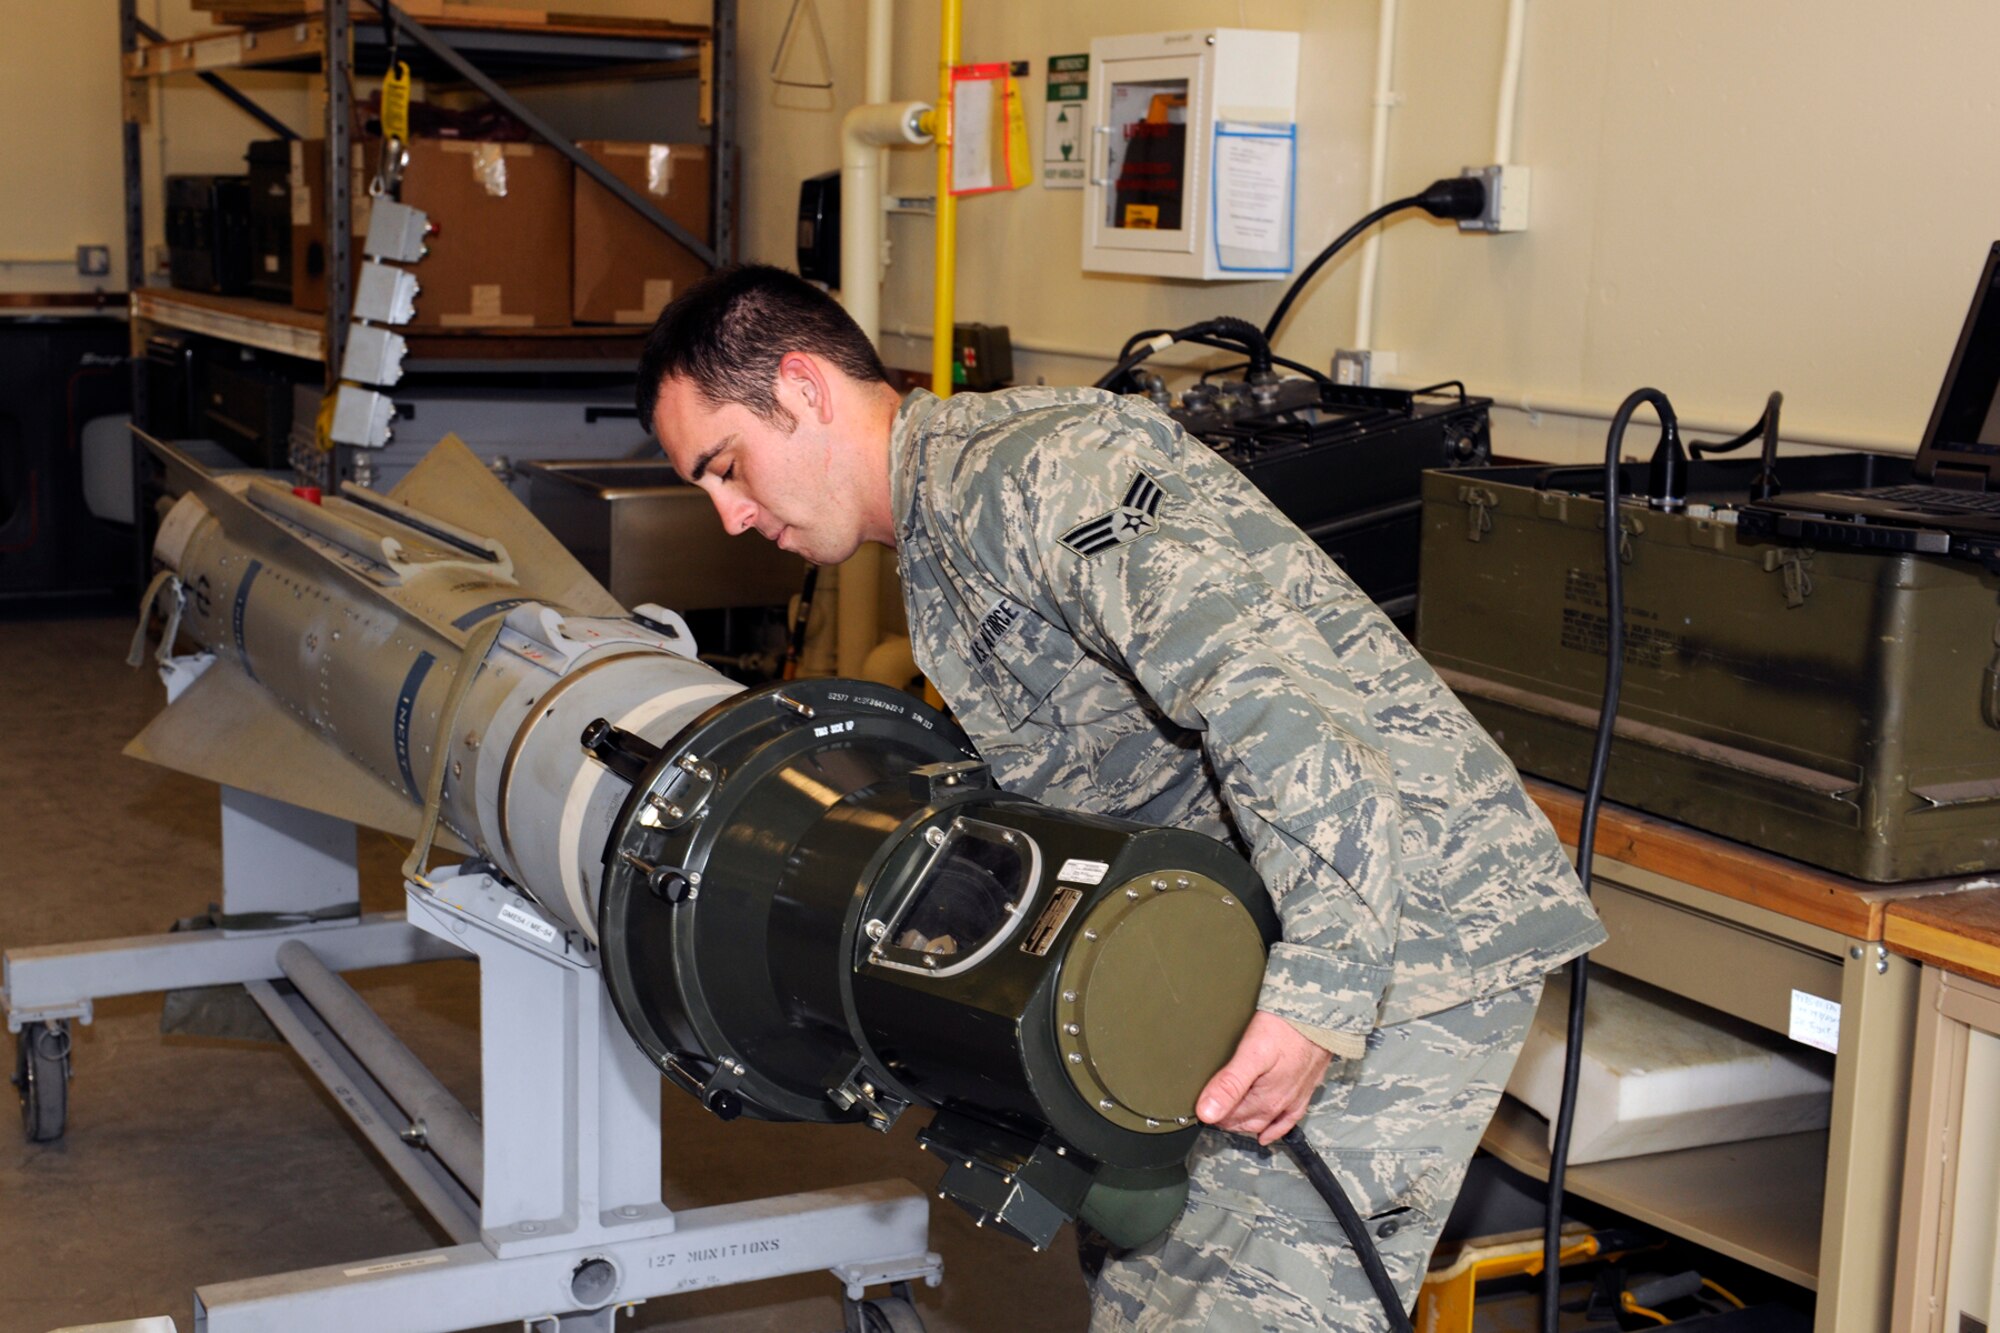 131102-Z-EZ686-211 -- Senior Airman Brant Long, 127th MXS Munitions, conducts an inspection and maintenance on the air to ground Training Guided Missile 65 otherwise known as the “Maverick” at Selfridge Air National Guard Base, Mich., Nov. 2, 2013. Long has been in Munitions since 2009 and said he enjoys working with his fellow coworkers on drill weekends. (U.S. Air National Guard photo by MSgt. David Kujawa / Released)